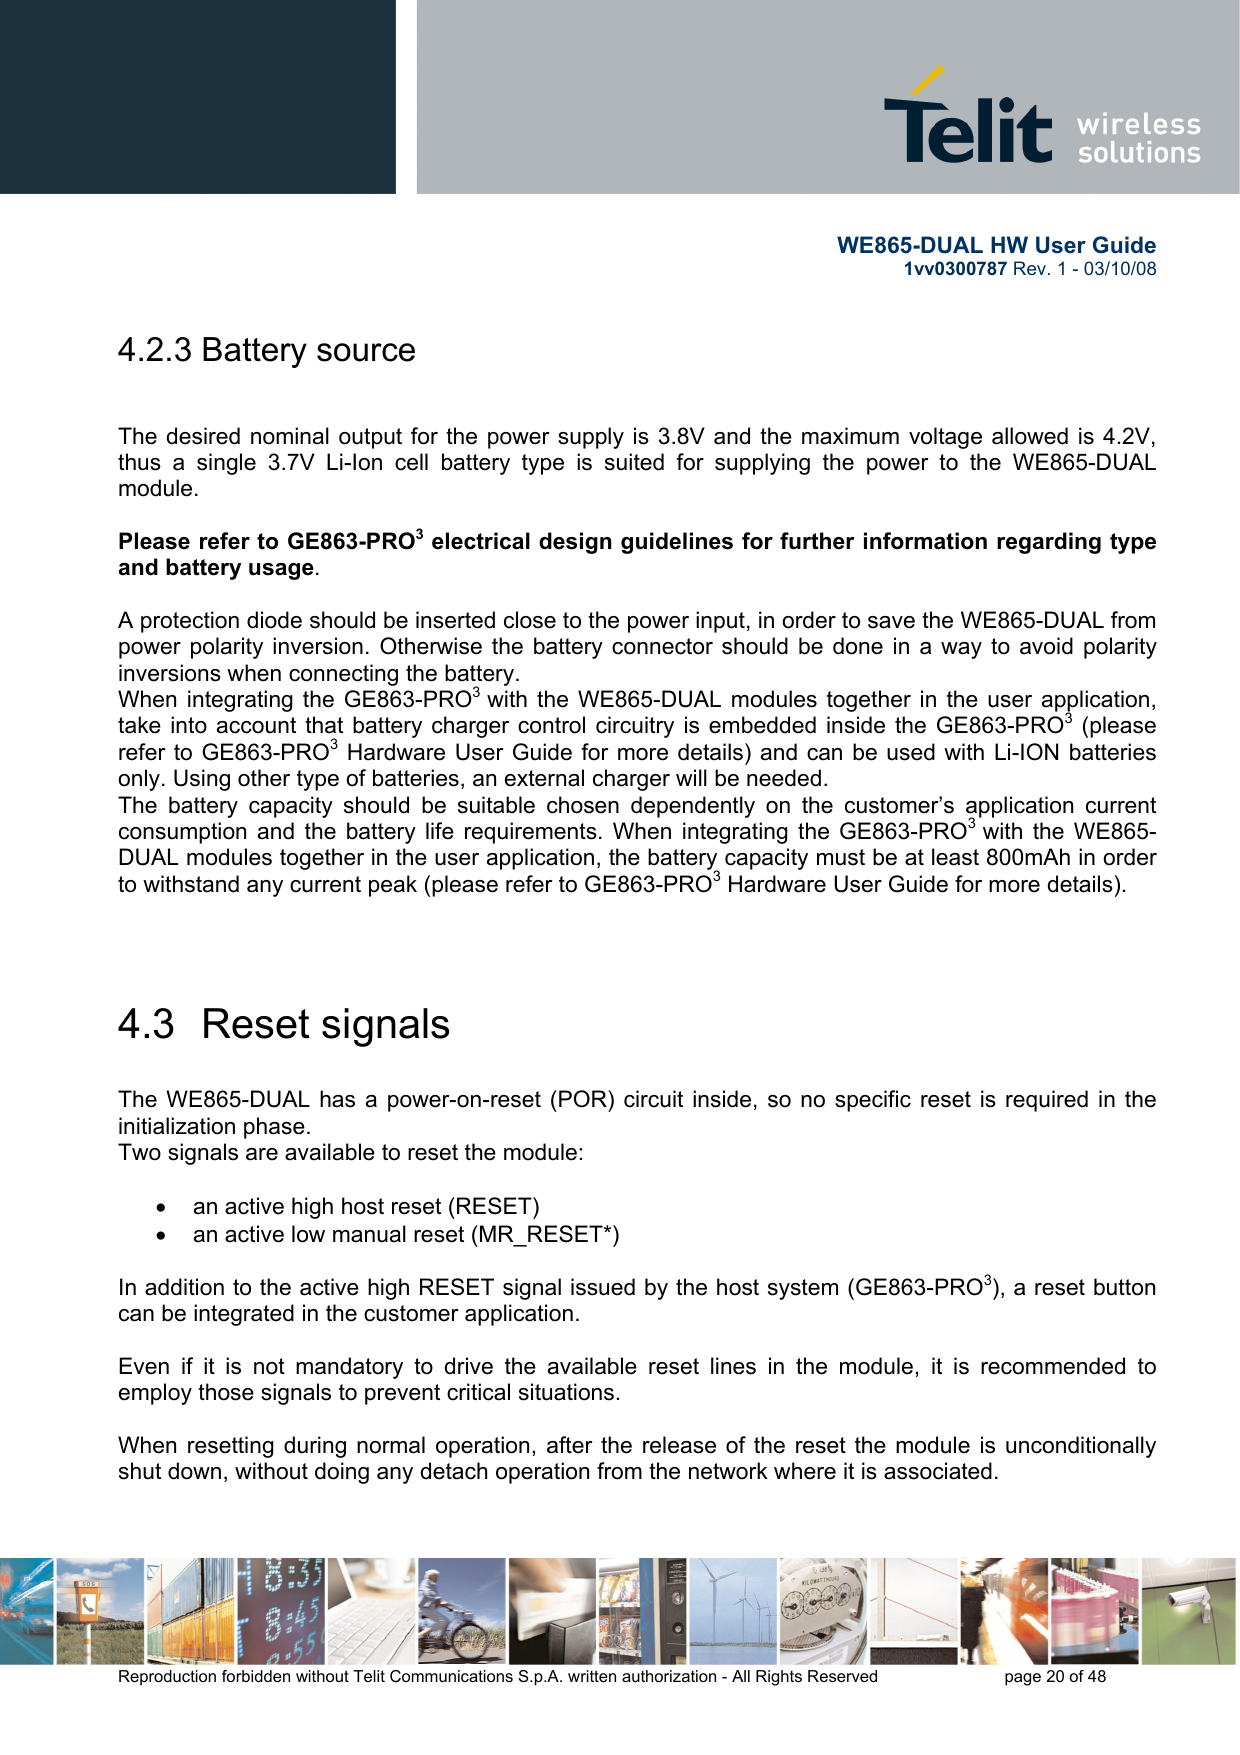       WE865-DUAL HW User Guide 1vv0300787 Rev. 1 - 03/10/08      Reproduction forbidden without Telit Communications S.p.A. written authorization - All Rights Reserved    page 20 of 48  4.2.3 Battery source    The desired nominal output for the power supply is 3.8V and the maximum voltage allowed is 4.2V, thus a single 3.7V Li-Ion cell battery type is suited for supplying the power to the WE865-DUAL module.  Please refer to GE863-PRO3 electrical design guidelines for further information regarding type and battery usage.  A protection diode should be inserted close to the power input, in order to save the WE865-DUAL from power polarity inversion. Otherwise the battery connector should be done in a way to avoid polarity inversions when connecting the battery. When integrating the GE863-PRO3  with the WE865-DUAL modules together in the user application, take into account that battery charger control circuitry is embedded inside the GE863-PRO3 (please refer to GE863-PRO3 Hardware User Guide for more details) and can be used with Li-ION batteries only. Using other type of batteries, an external charger will be needed. The battery capacity should be suitable chosen dependently on the customer’s application current consumption and the battery life requirements. When integrating the GE863-PRO3  with the WE865-DUAL modules together in the user application, the battery capacity must be at least 800mAh in order to withstand any current peak (please refer to GE863-PRO3 Hardware User Guide for more details).   4.3  Reset signals  The WE865-DUAL has a power-on-reset (POR) circuit inside, so no specific reset is required in the initialization phase. Two signals are available to reset the module:  •  an active high host reset (RESET)  •  an active low manual reset (MR_RESET*)  In addition to the active high RESET signal issued by the host system (GE863-PRO3), a reset button can be integrated in the customer application.  Even if it is not mandatory to drive the available reset lines in the module, it is recommended to employ those signals to prevent critical situations.    When resetting during normal operation, after the release of the reset the module is unconditionally shut down, without doing any detach operation from the network where it is associated.  